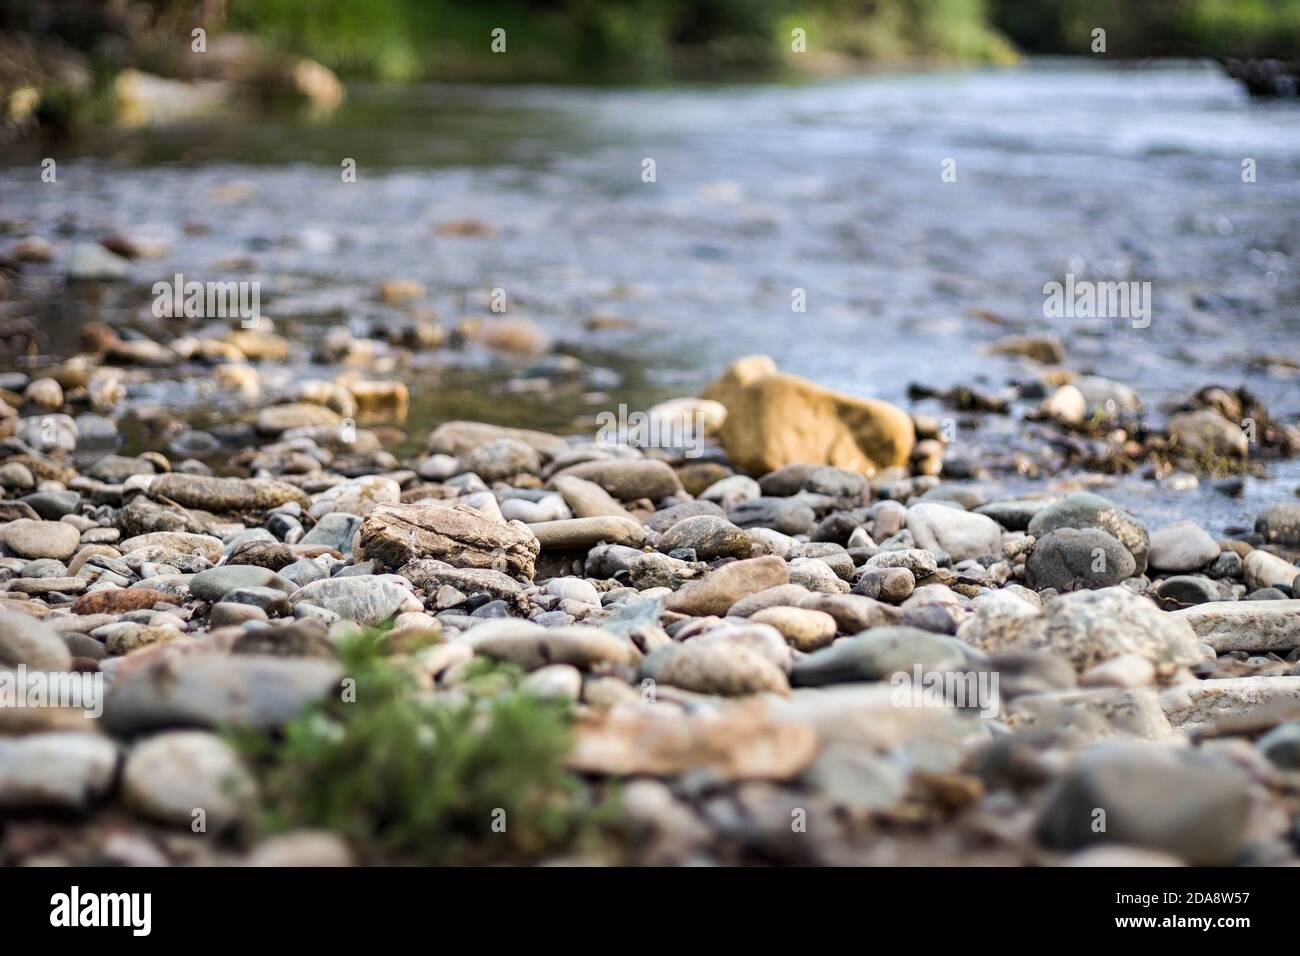 A lot of small stones and pebbles on the river coast. Shallow depth of field, blurred background. Stock Photo